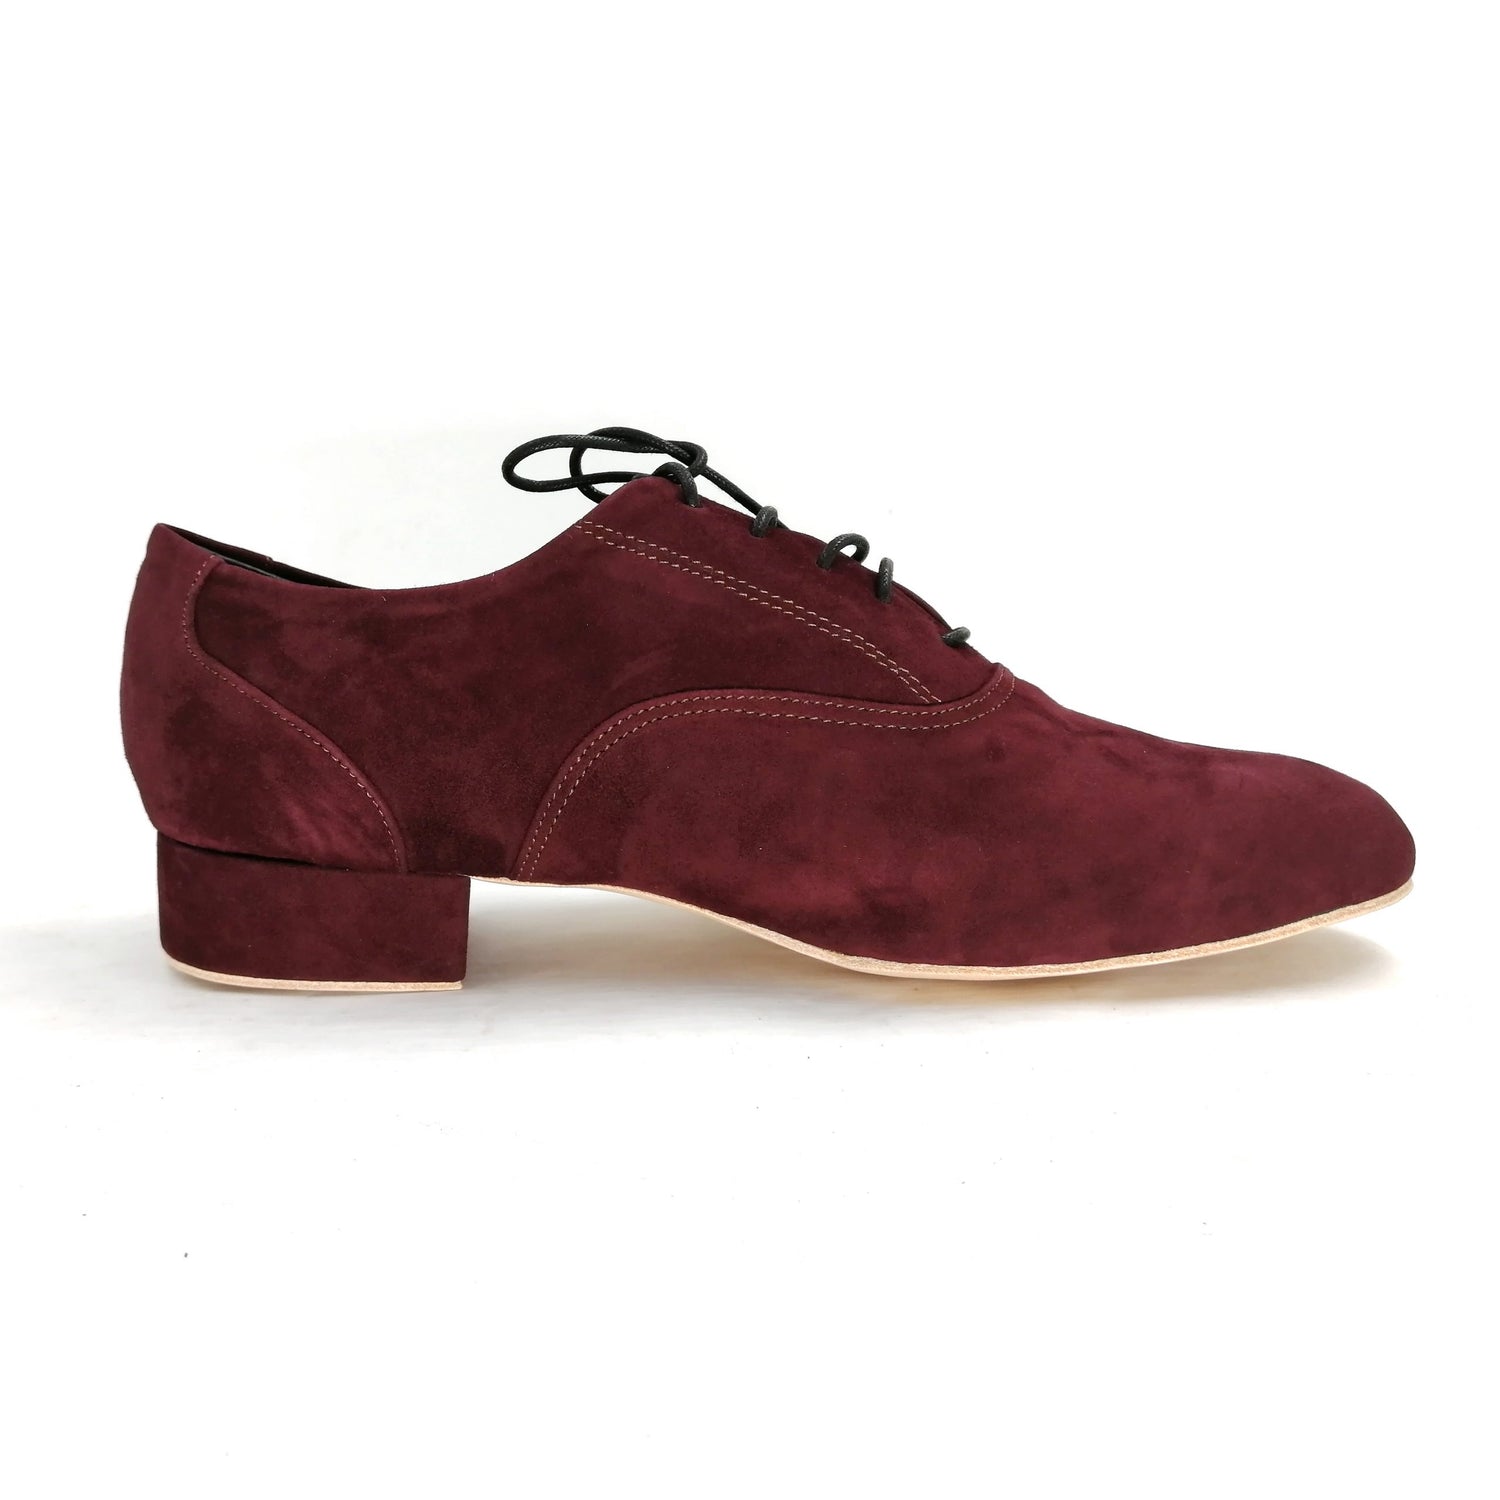 Men's Pro Dancer Argentine Tango Shoes with 1 inch Leather Heel and Lace-up in Brownish Red0